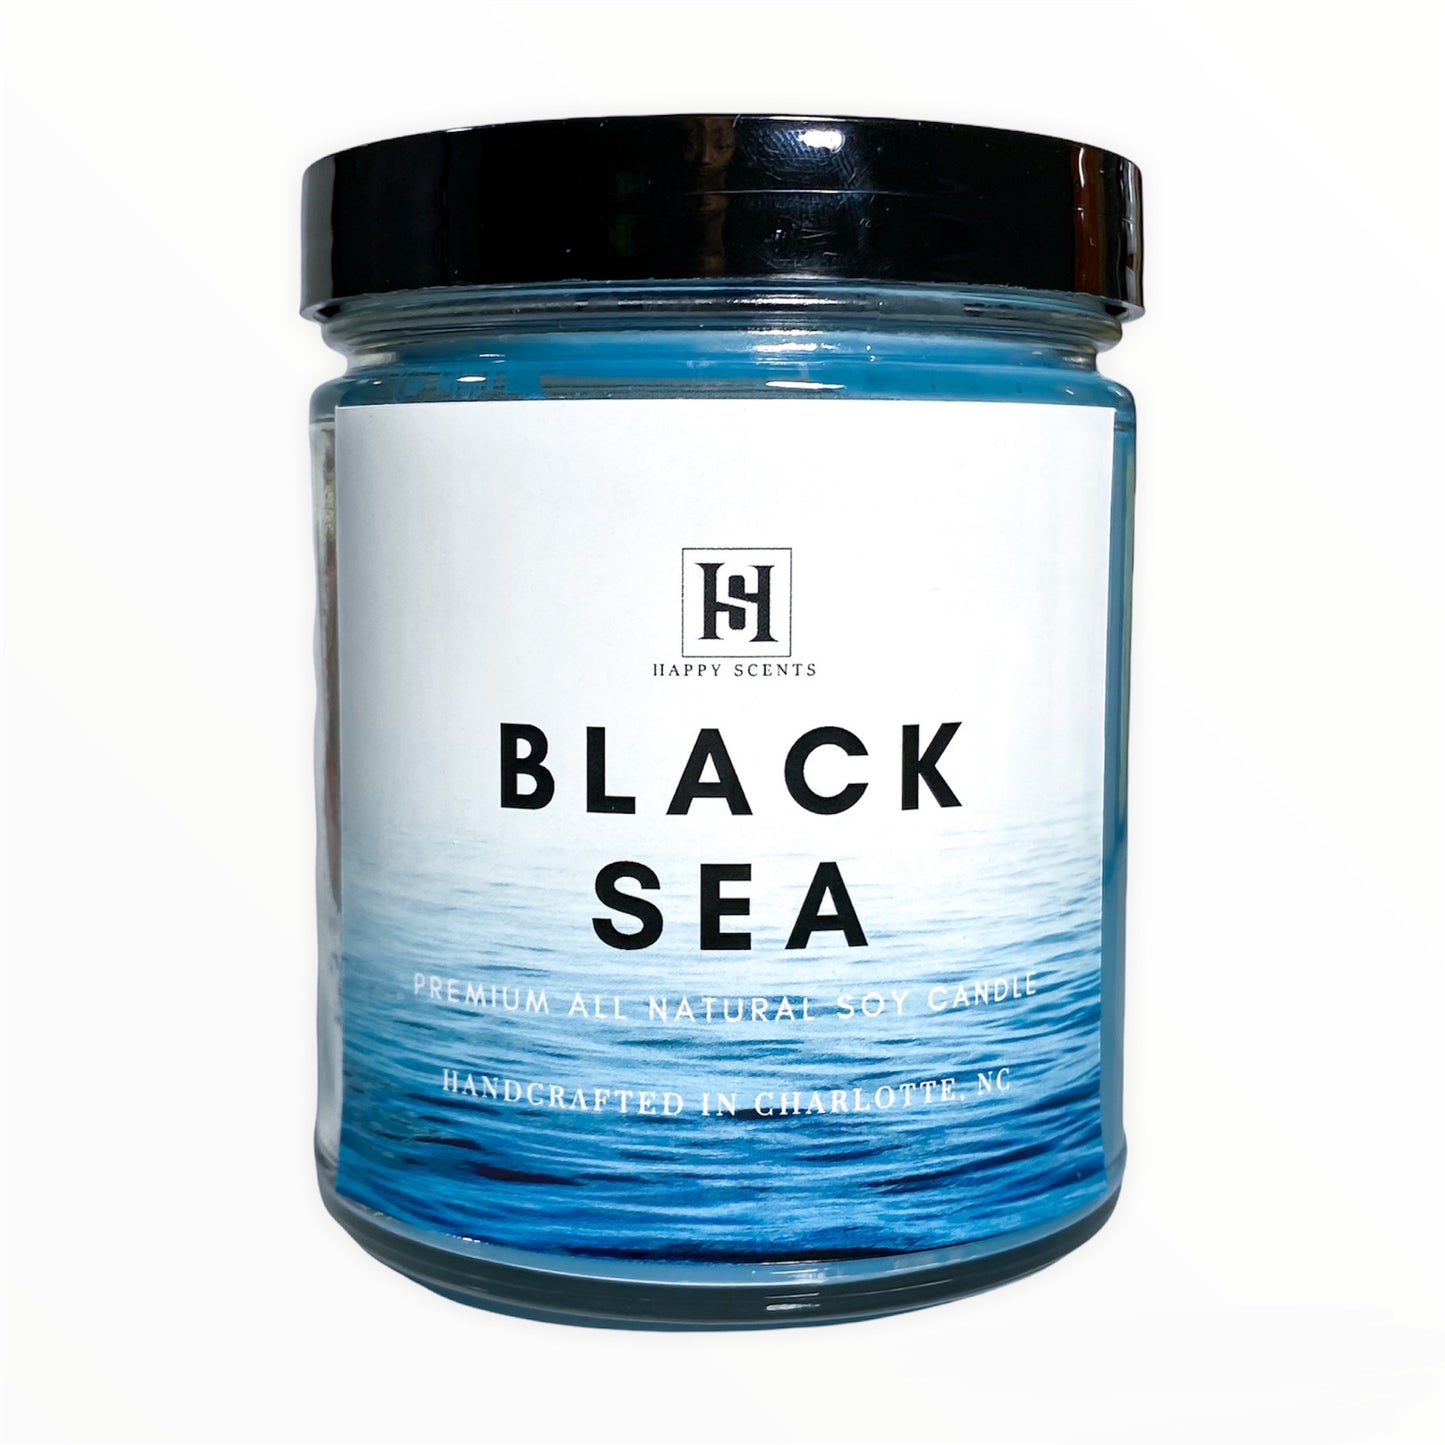 Black Sea scented candle. Beachy scented candle. 